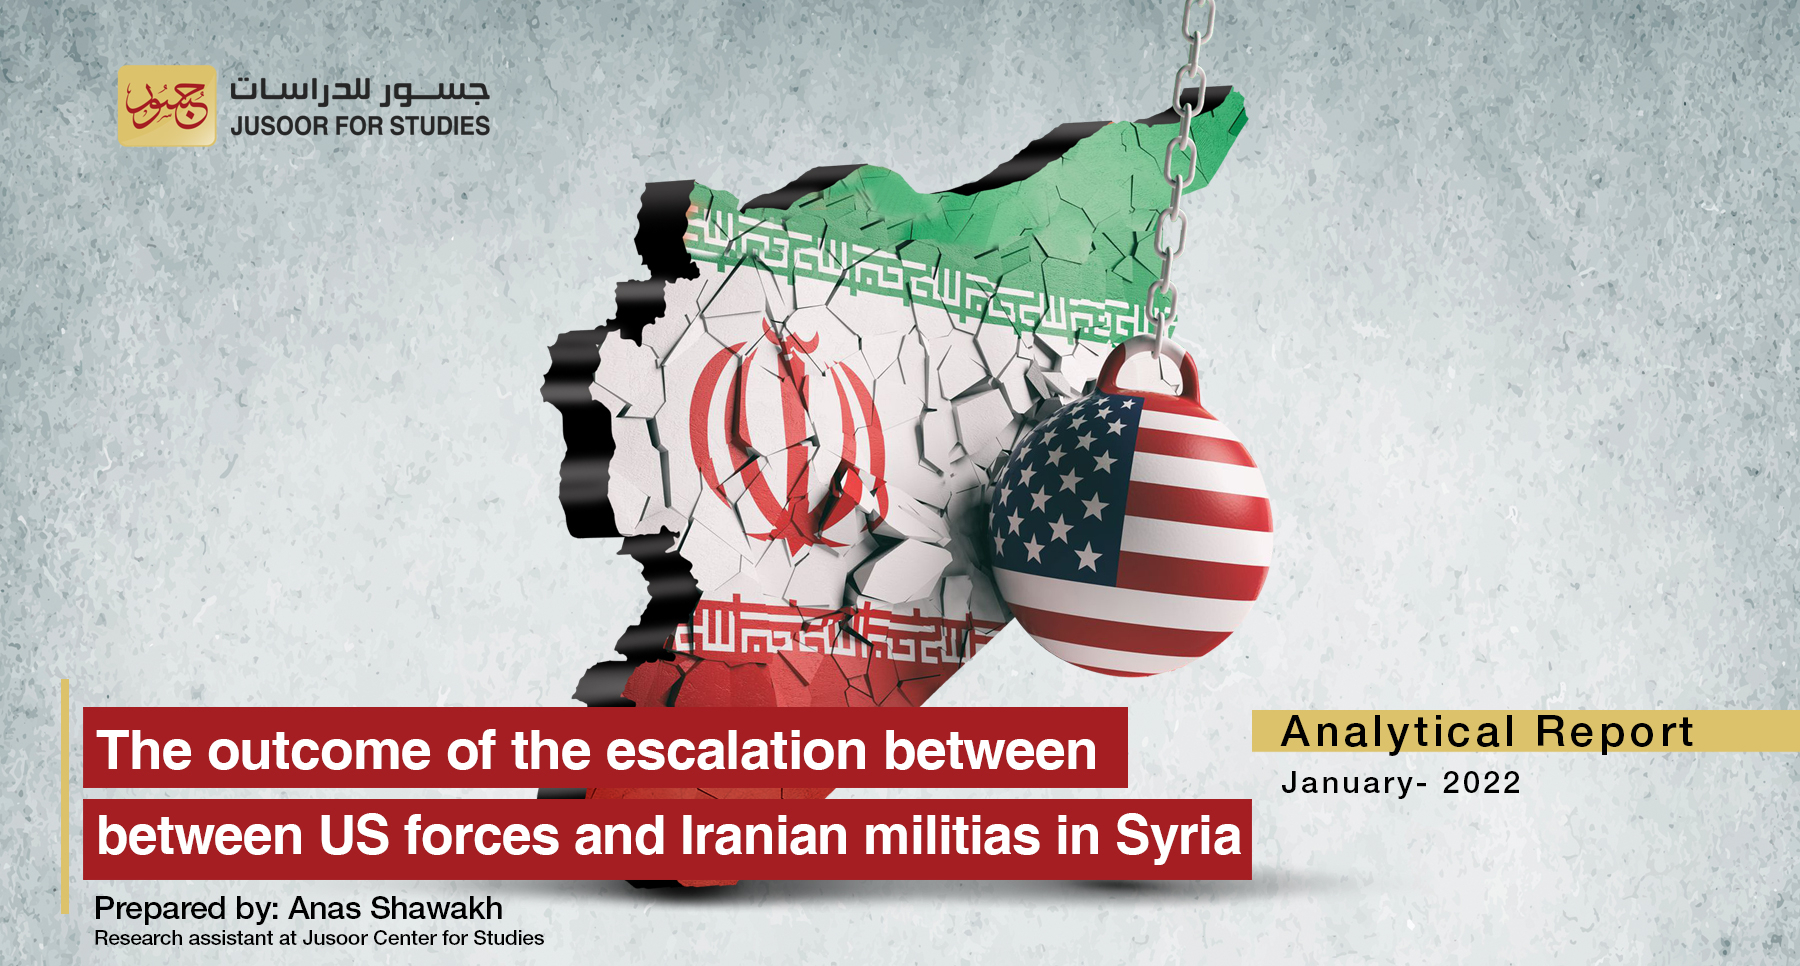 The Outcome of the Escalation between US Forces and Iranian Militias in Syria